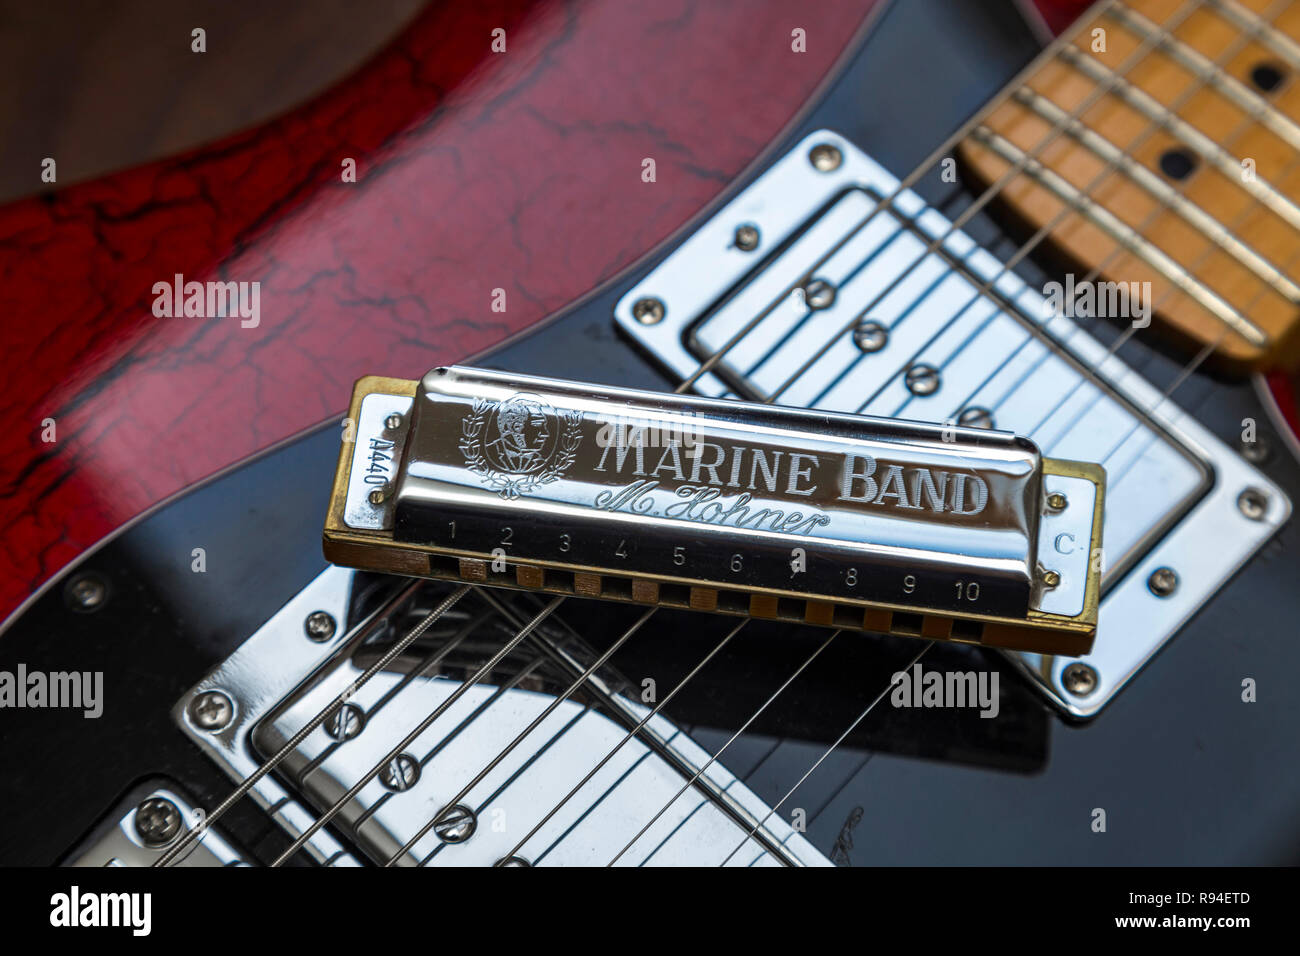 Hohner Marine Band harmonica on an old electric guitar. Blues, rock music, Stock Photo